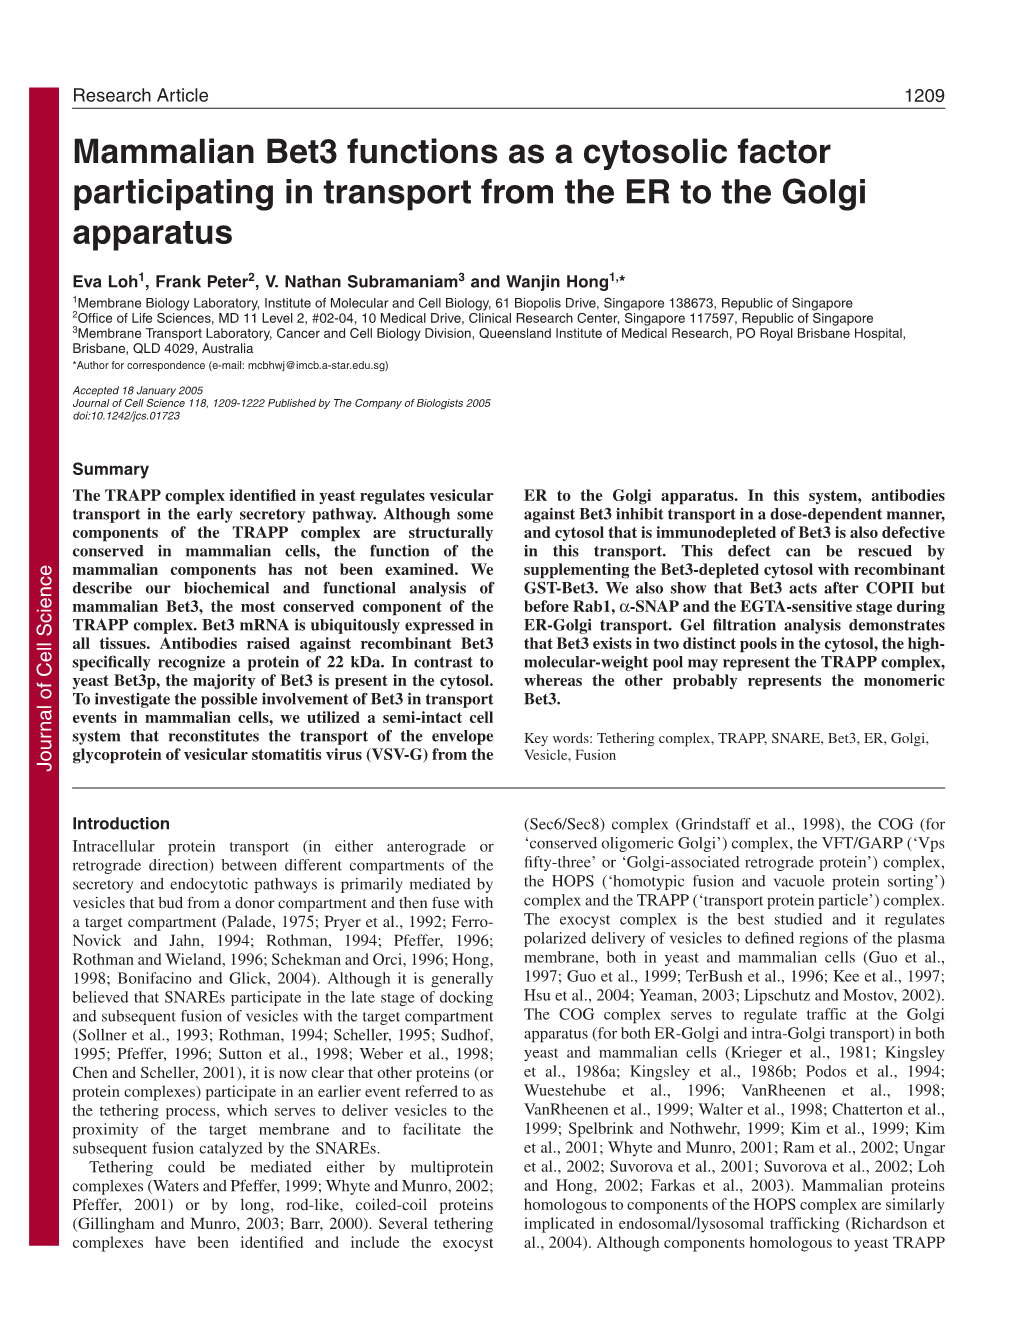 Mammalian Bet3 Functions As a Cytosolic Factor Participating in Transport from the ER to the Golgi Apparatus